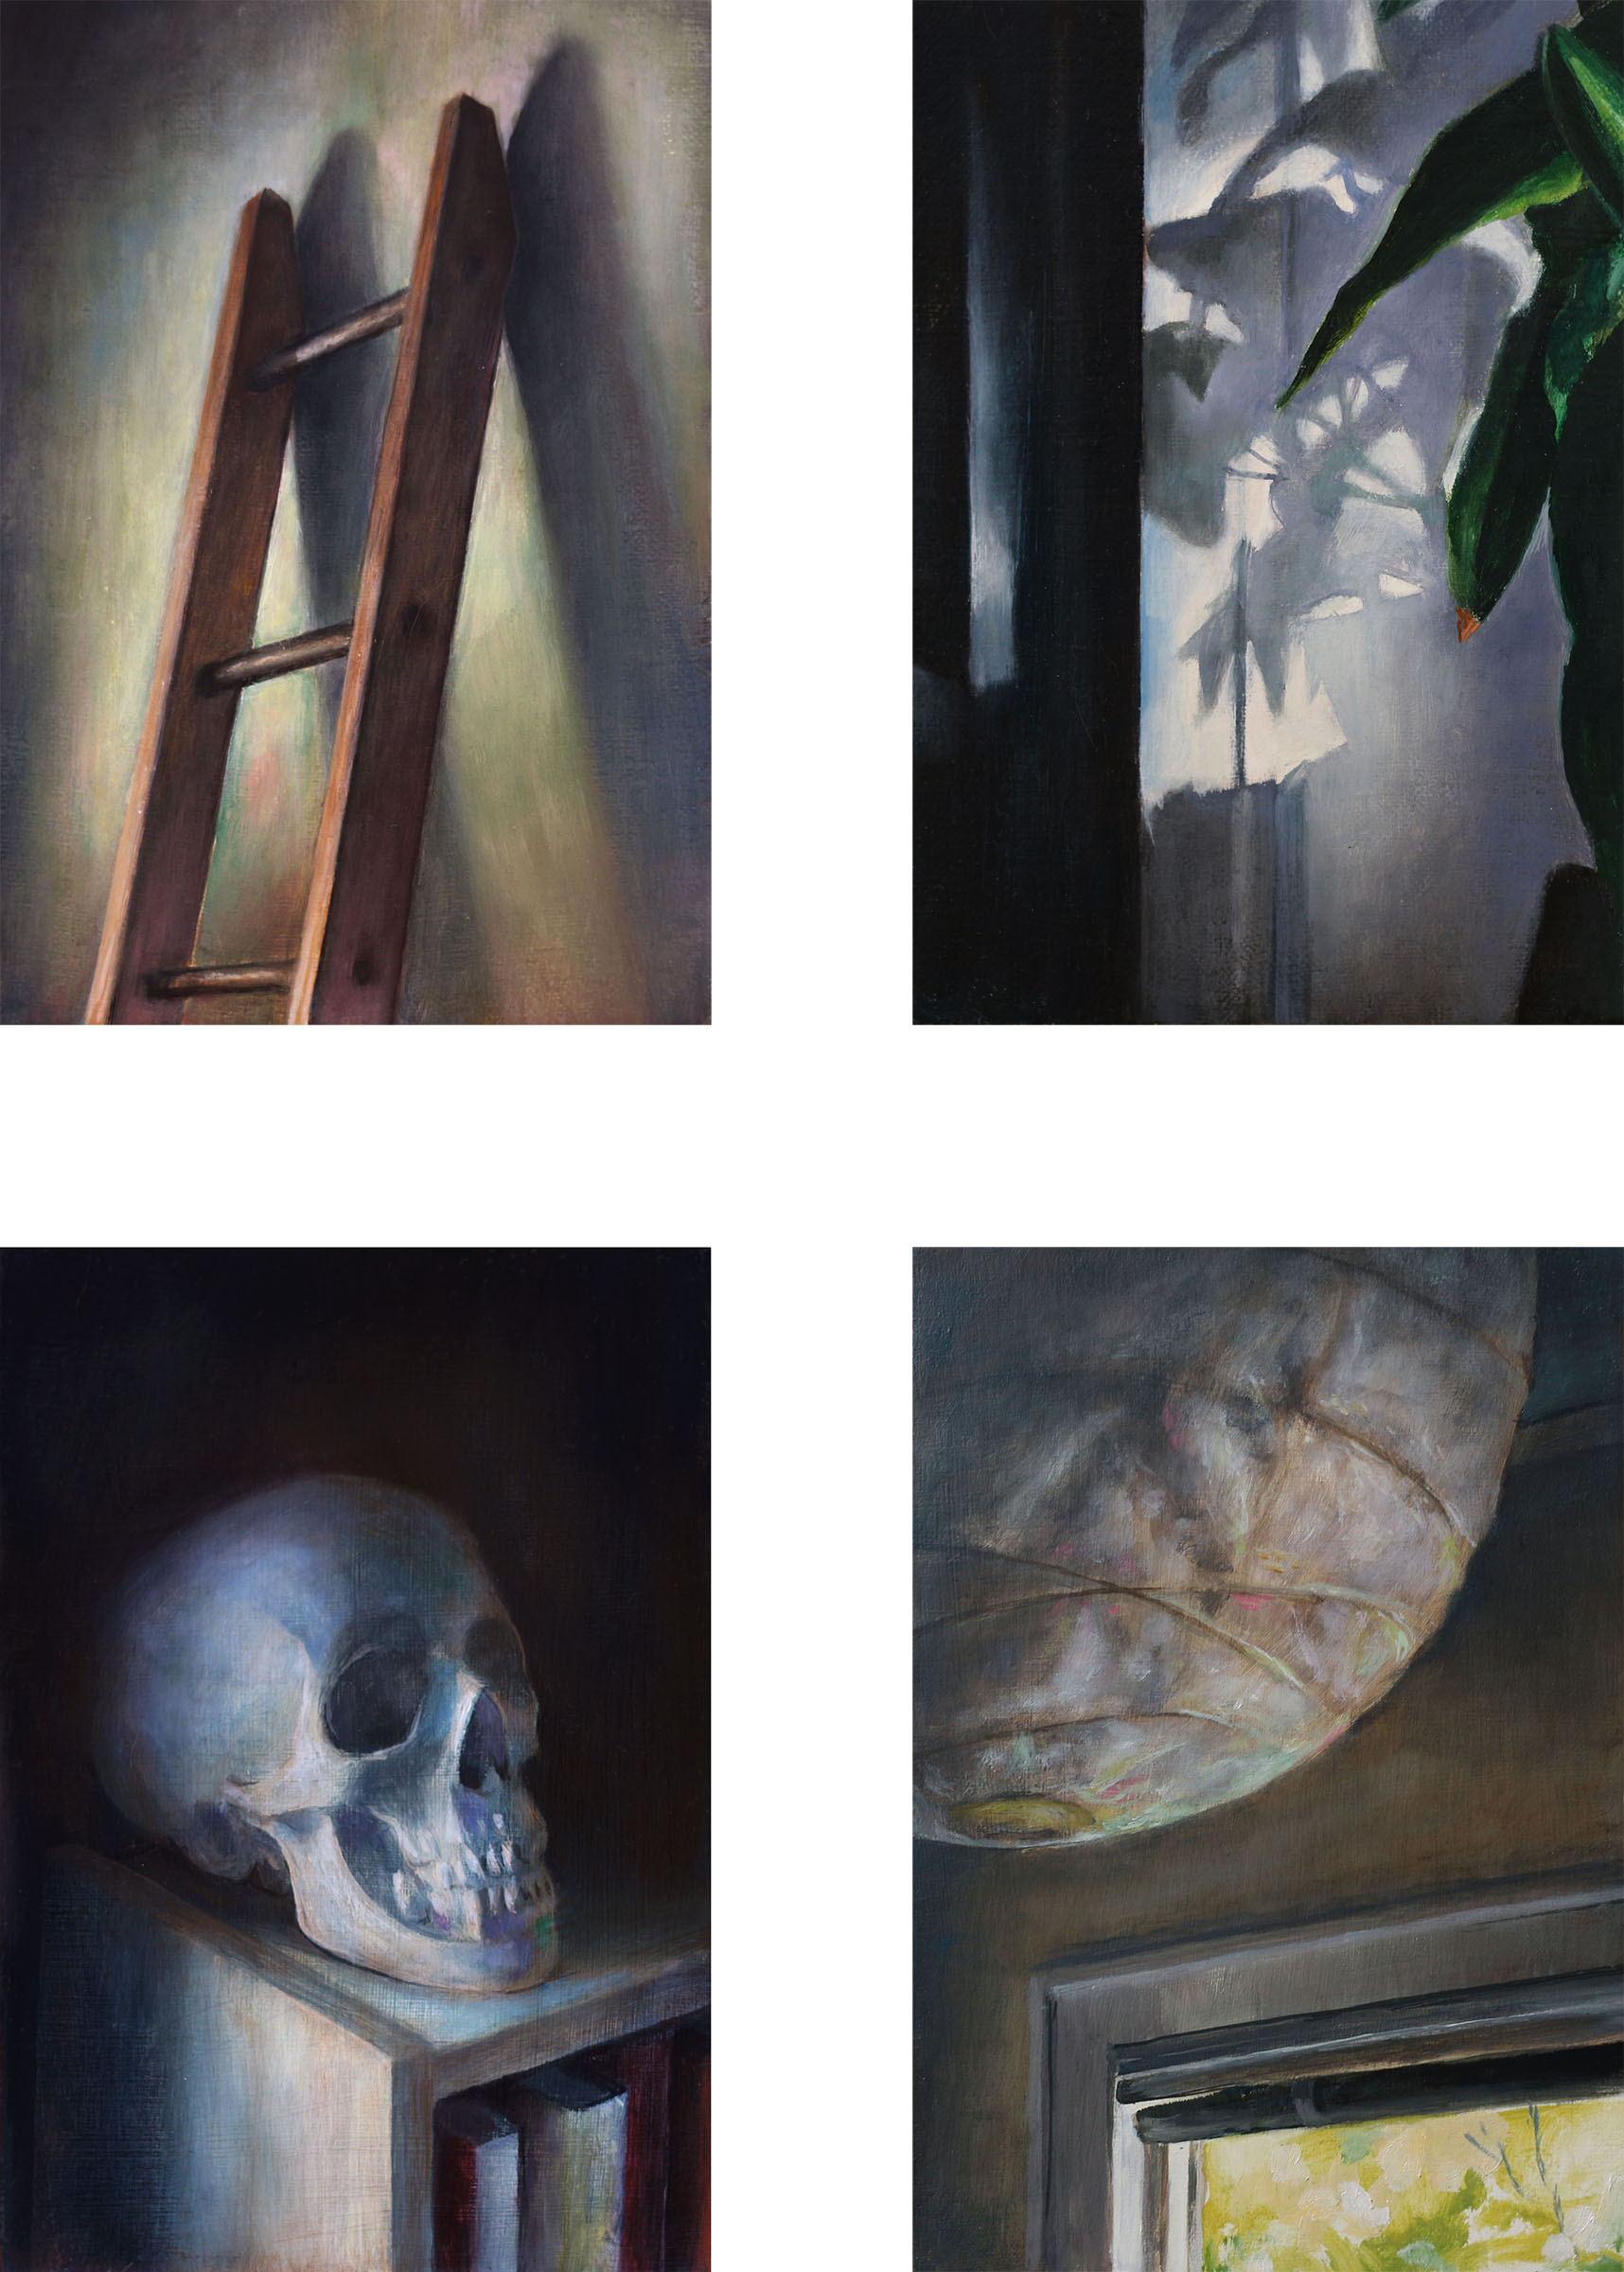   Contemplation   (Set of four paintings)  2017  Oil on linen  7 x 5 inches (each)    